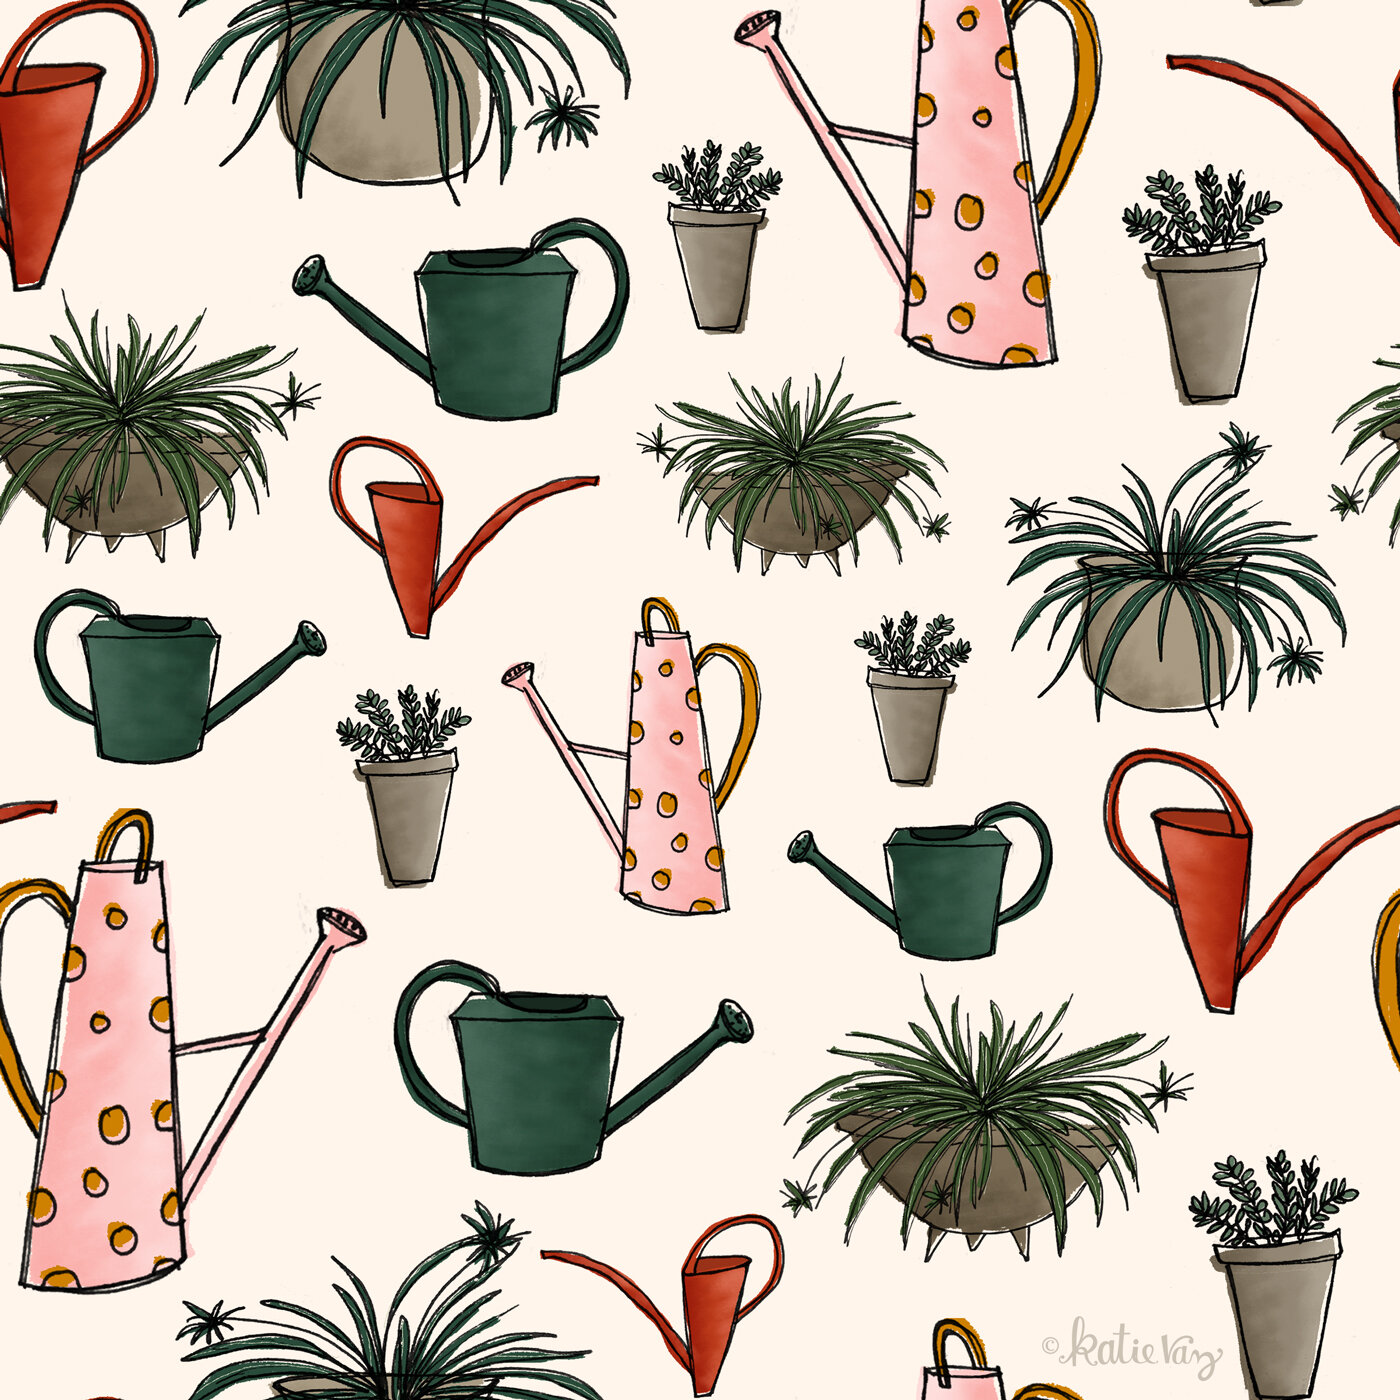 watering-cans_pattern_square_copyright.jpg